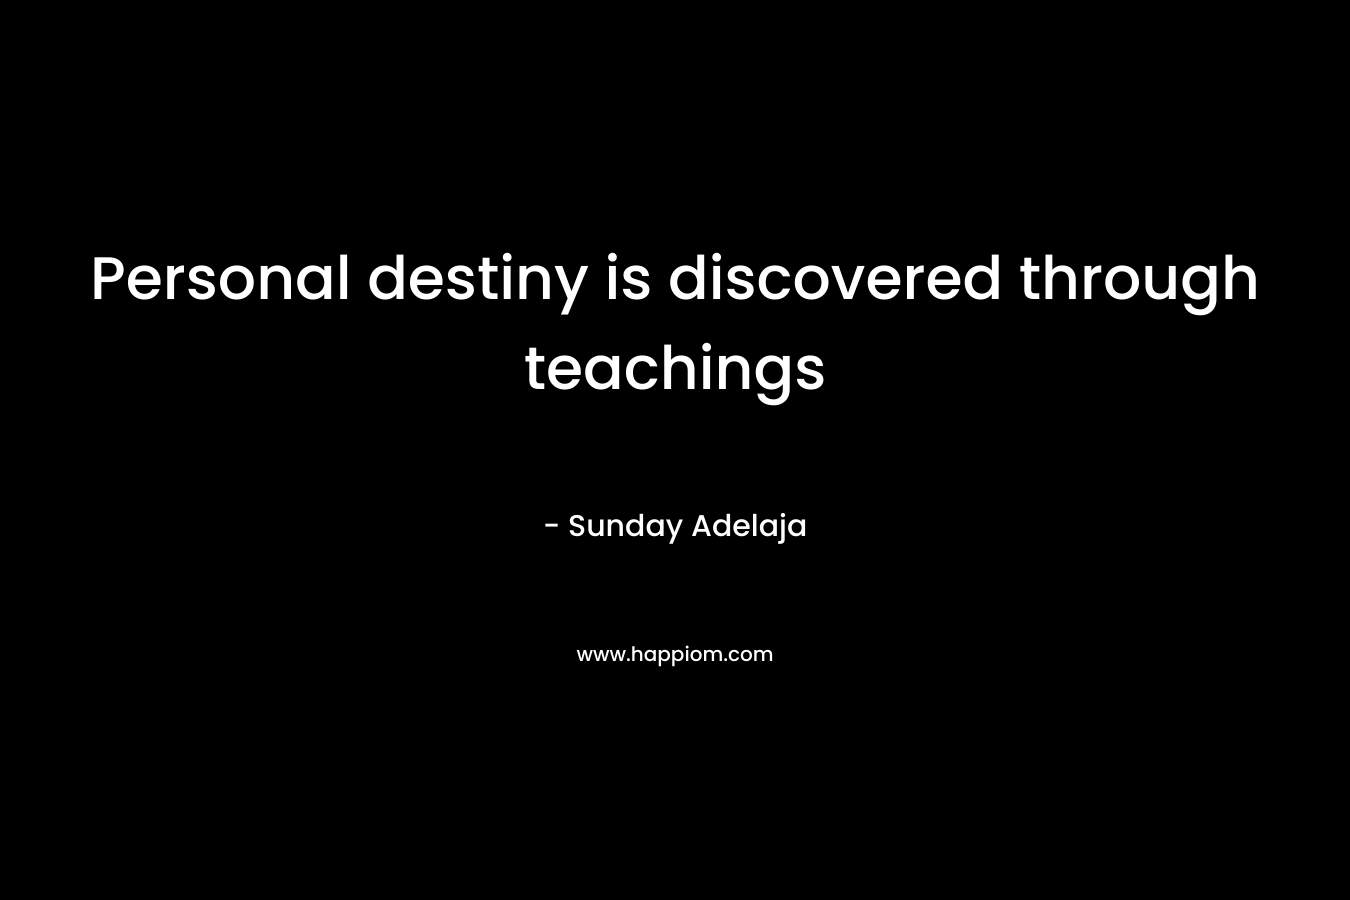 Personal destiny is discovered through teachings